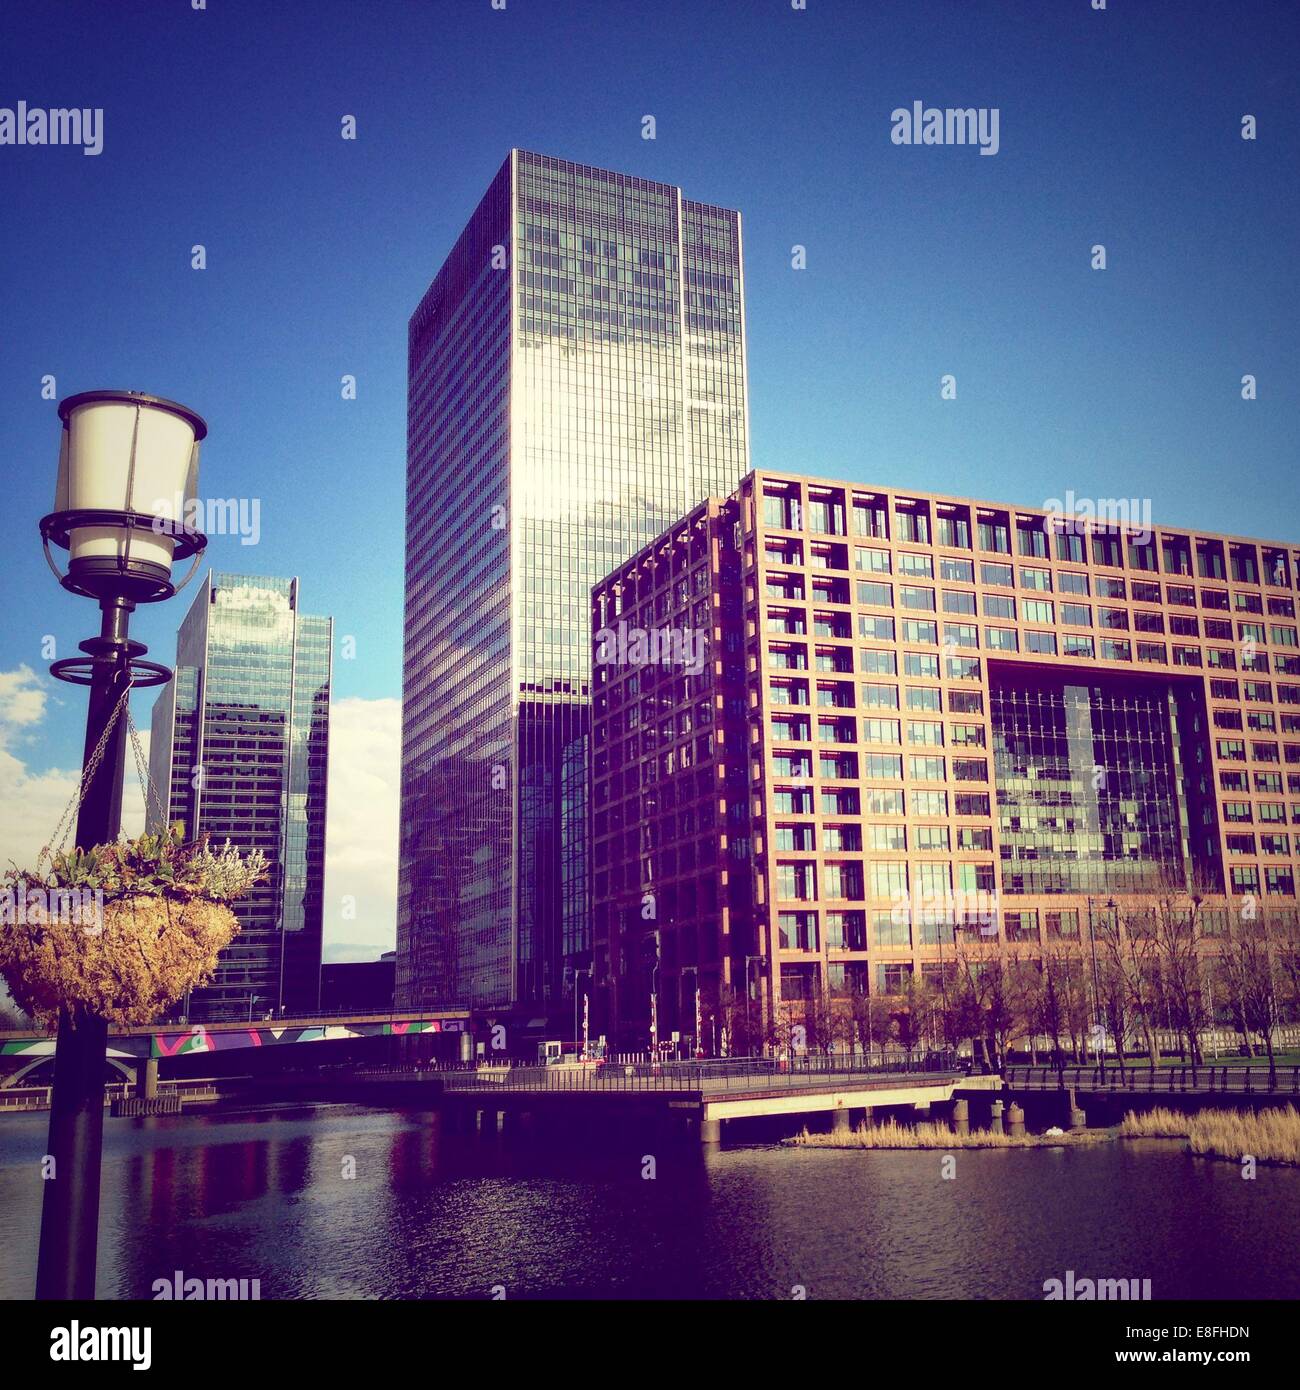 United Kingdom, London, Greater London, London Borough de Tower Hamlets, peuplier, Canada Square, Canary Wharf Banque D'Images